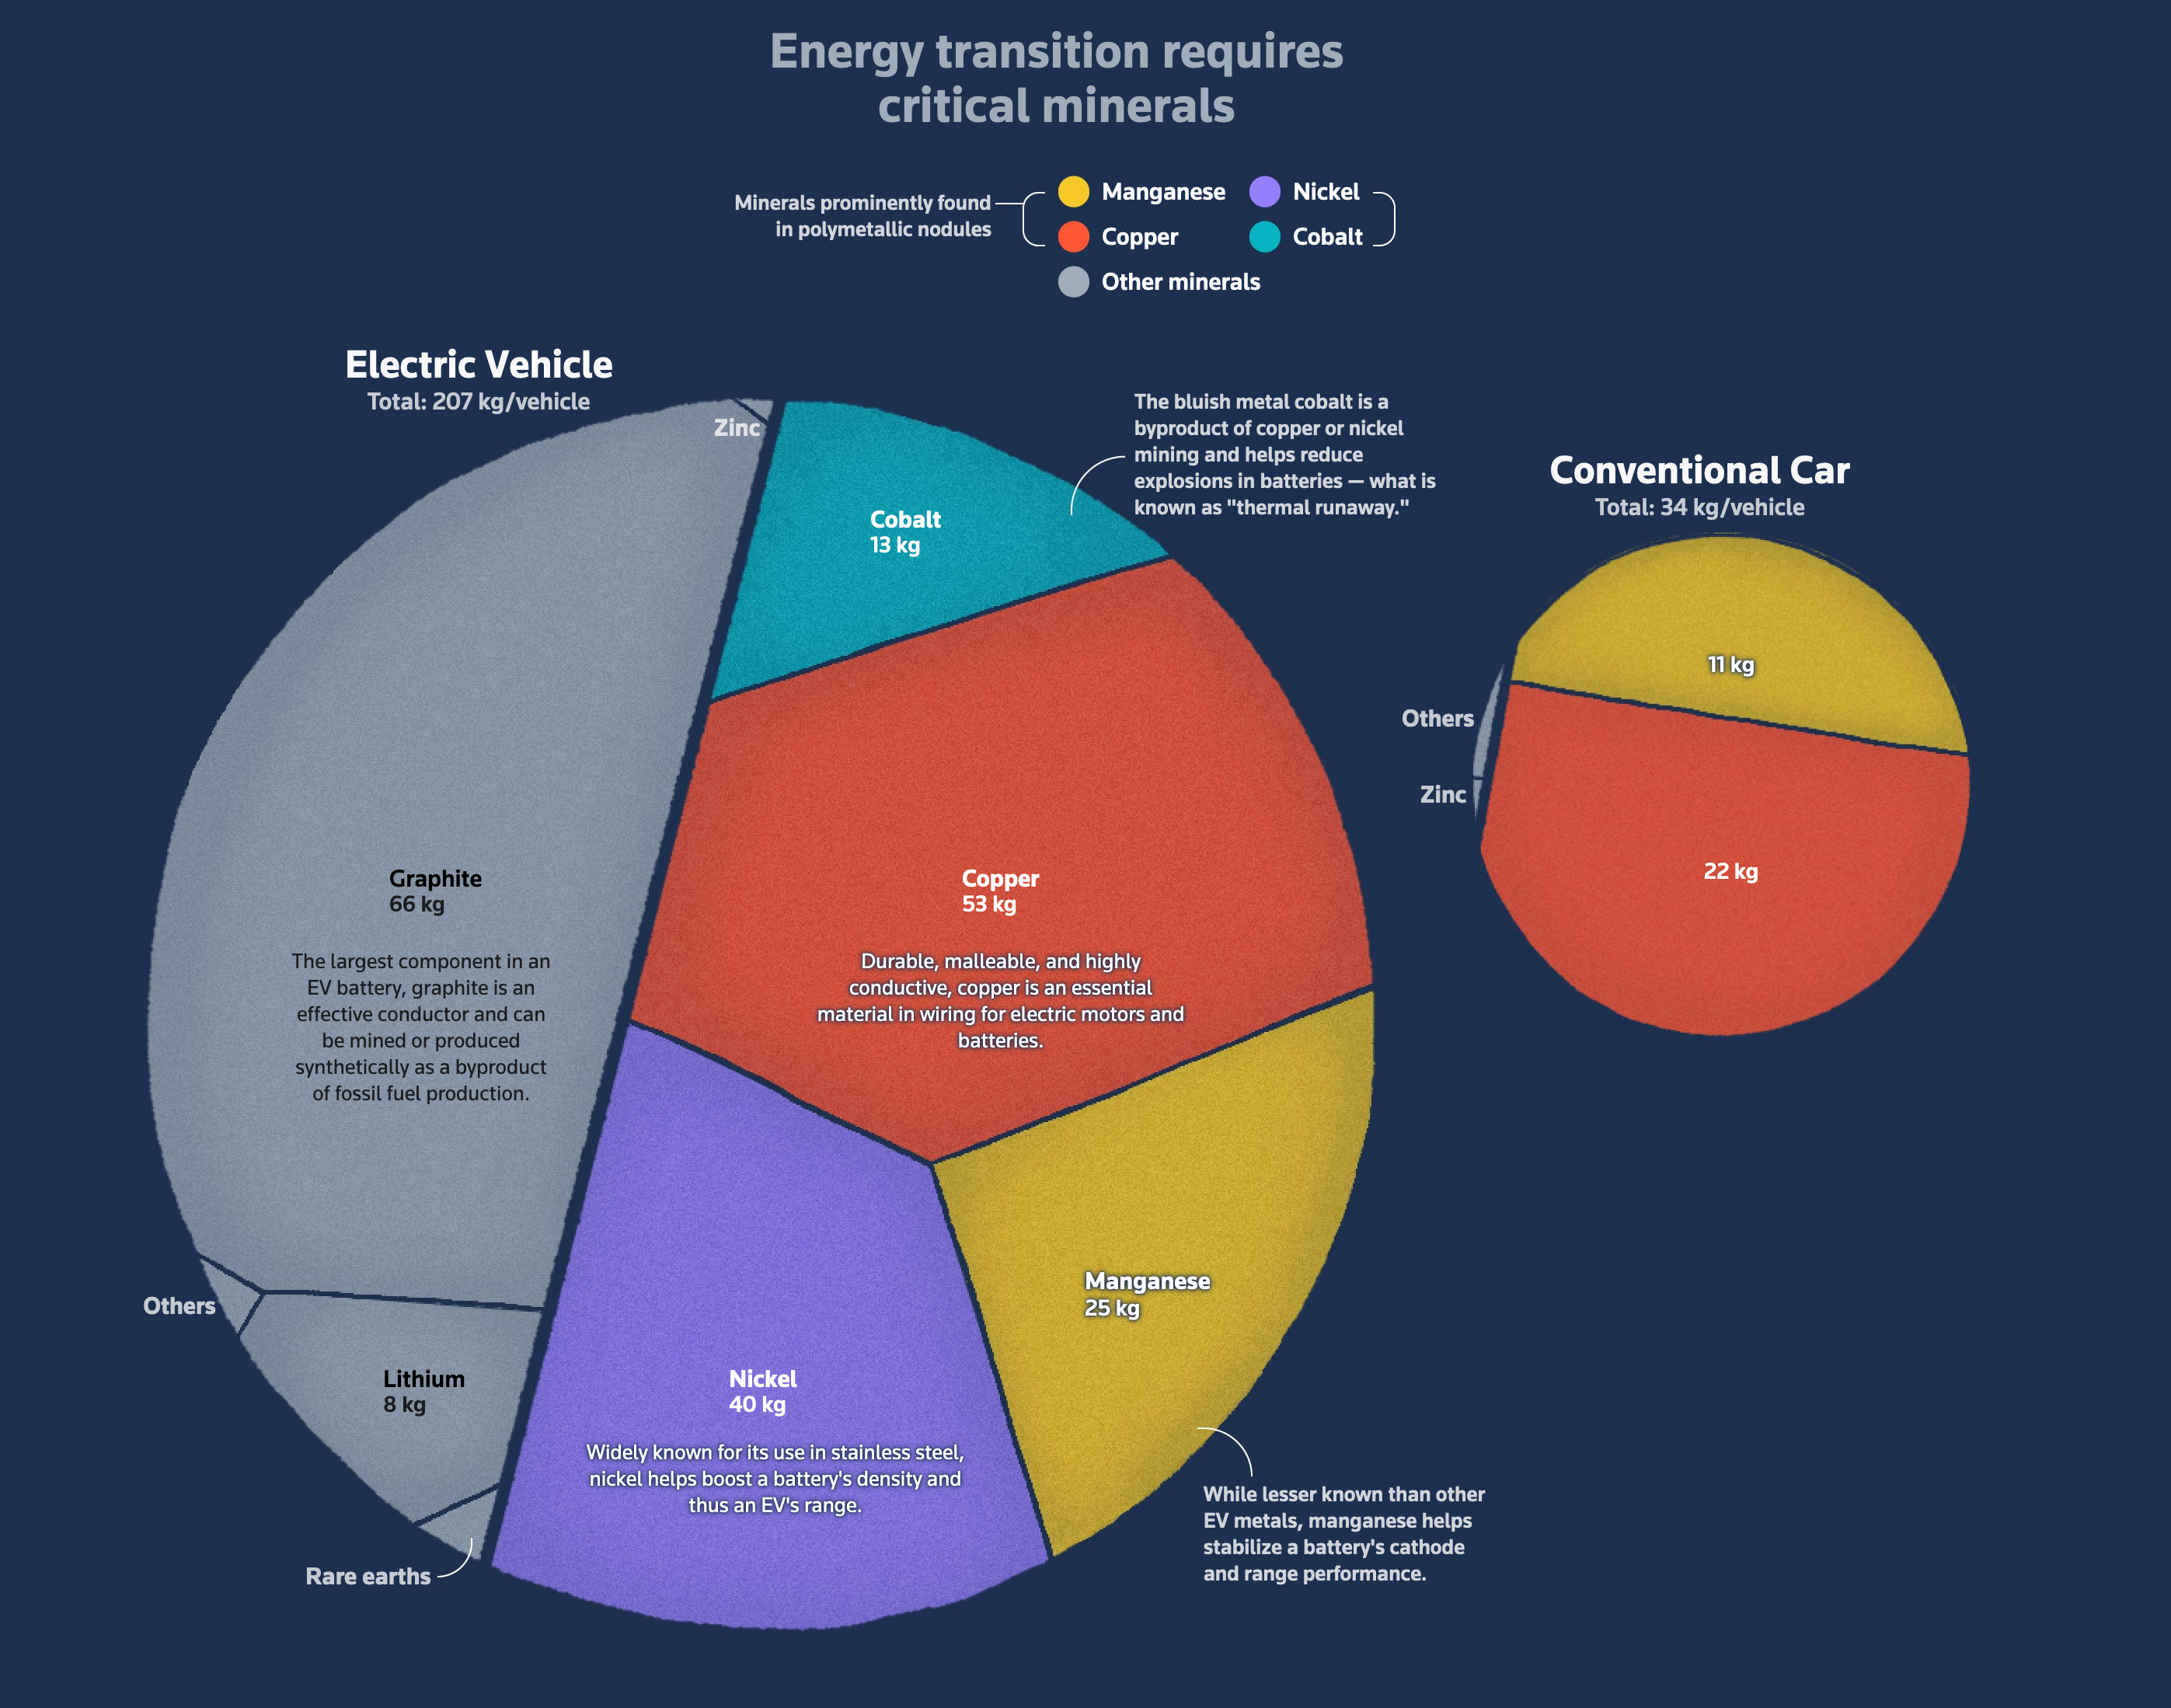 Critical minerals in energy transition